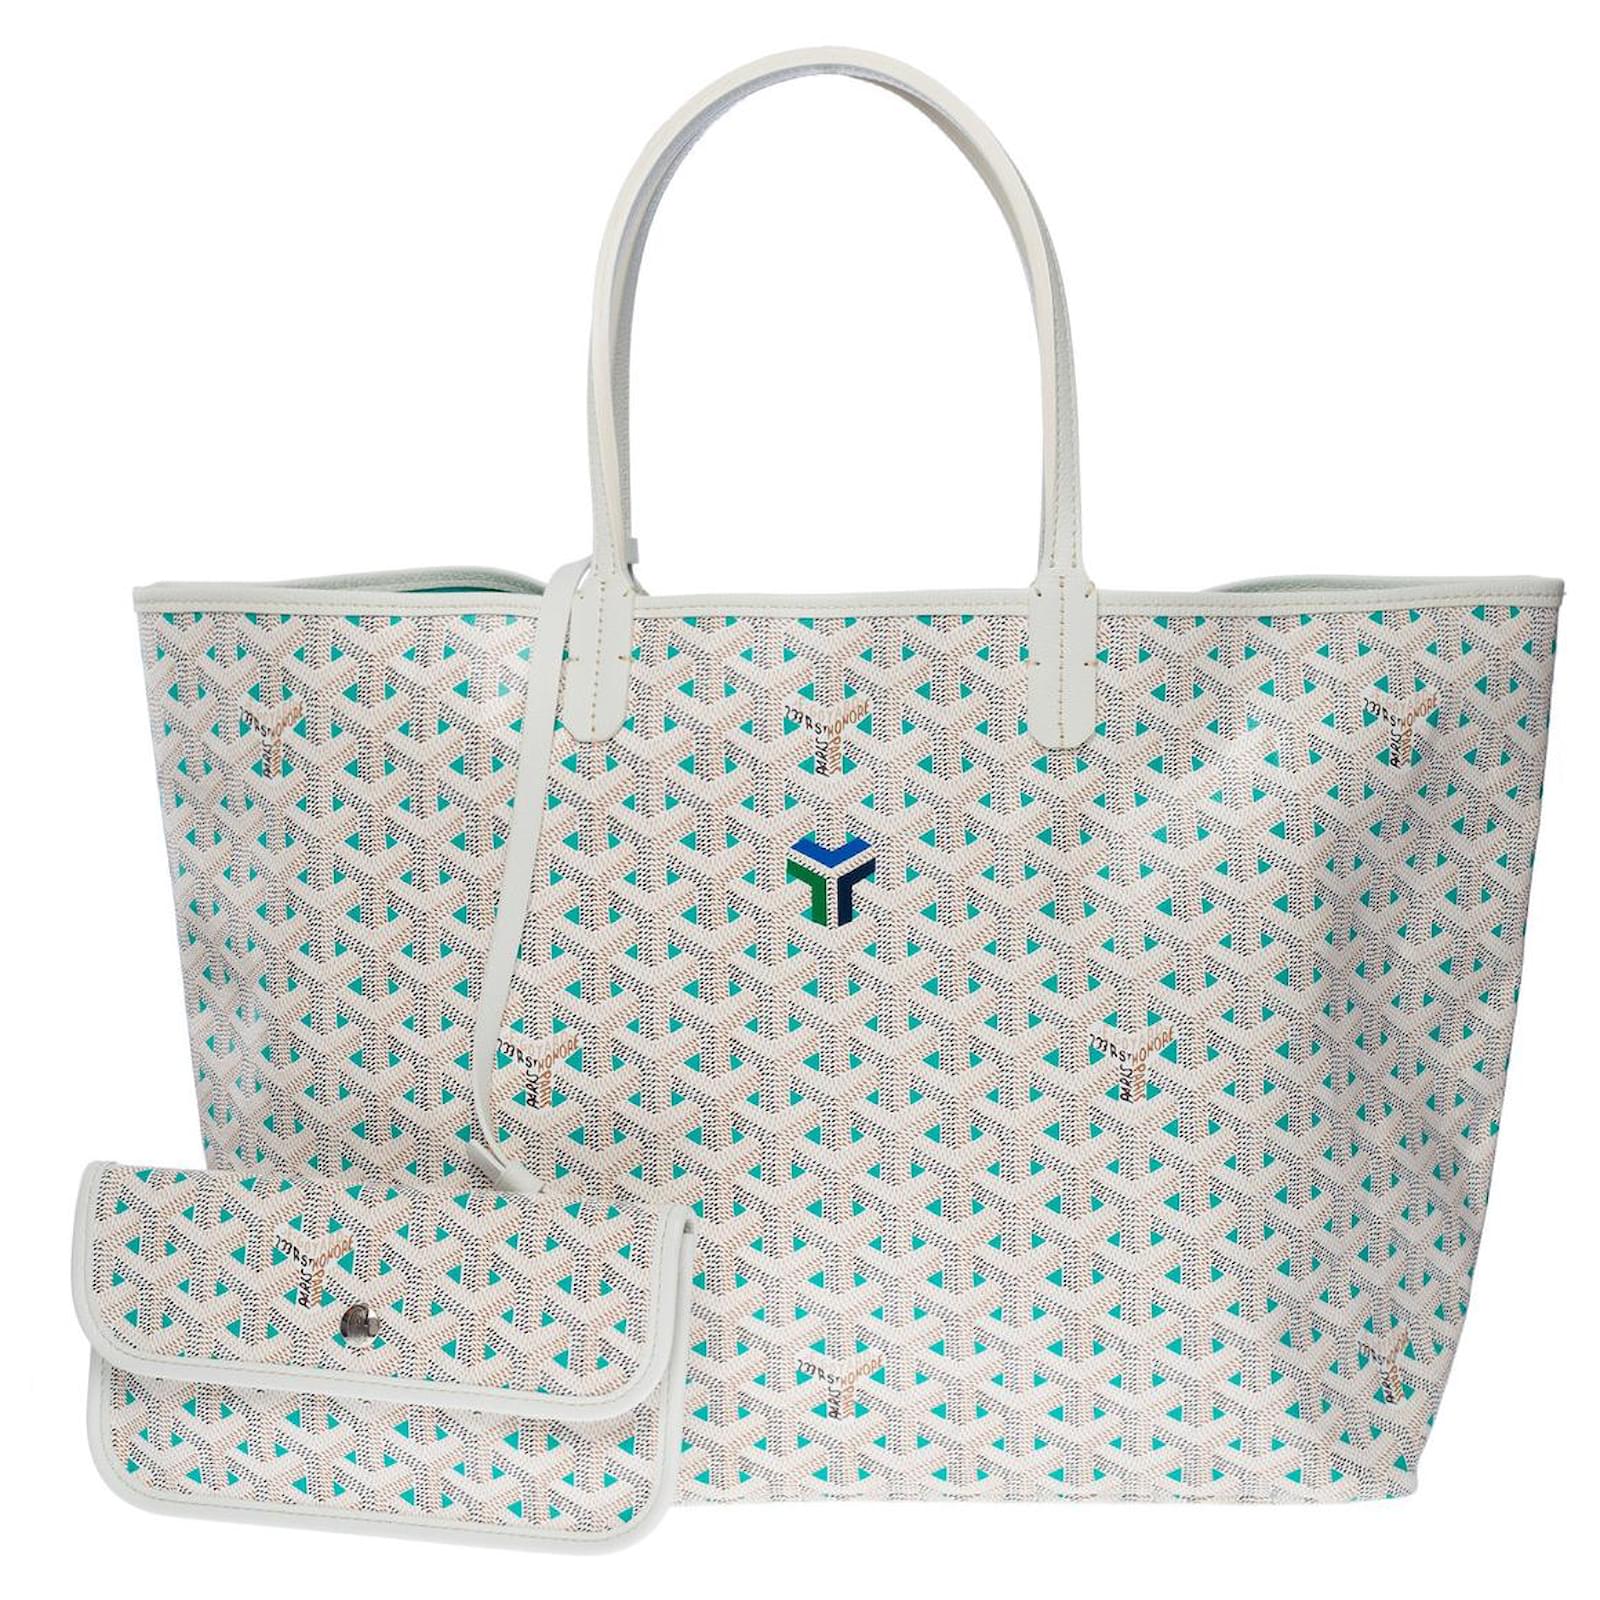 Goyard saint louis pm blue new authentic tote purchased from japan